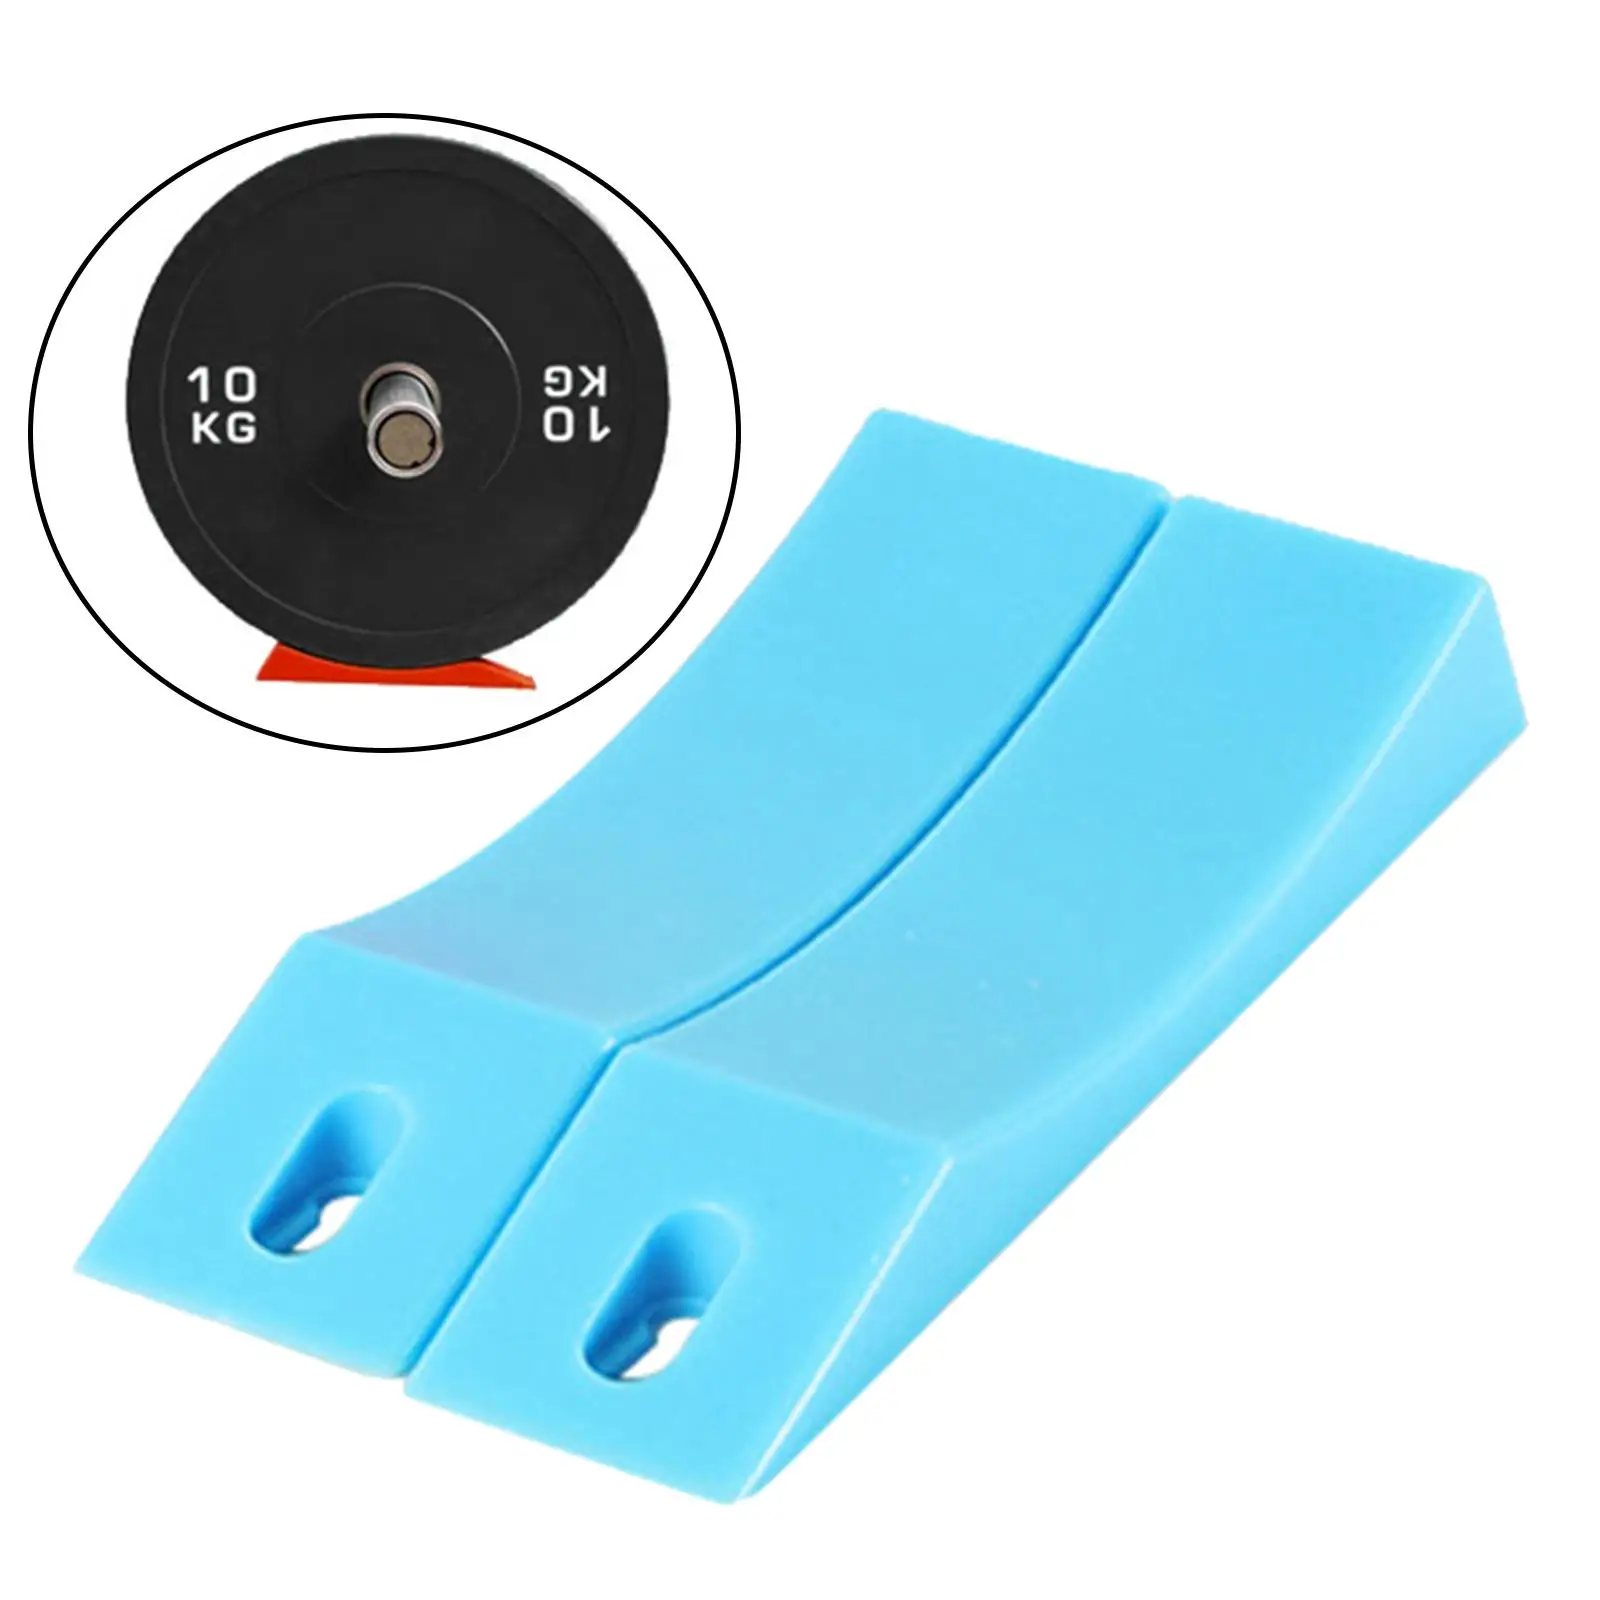 2Pcs Replacement Portable Universal Fixation Pad for Deadlift Dumbbell Saddles for Training Home